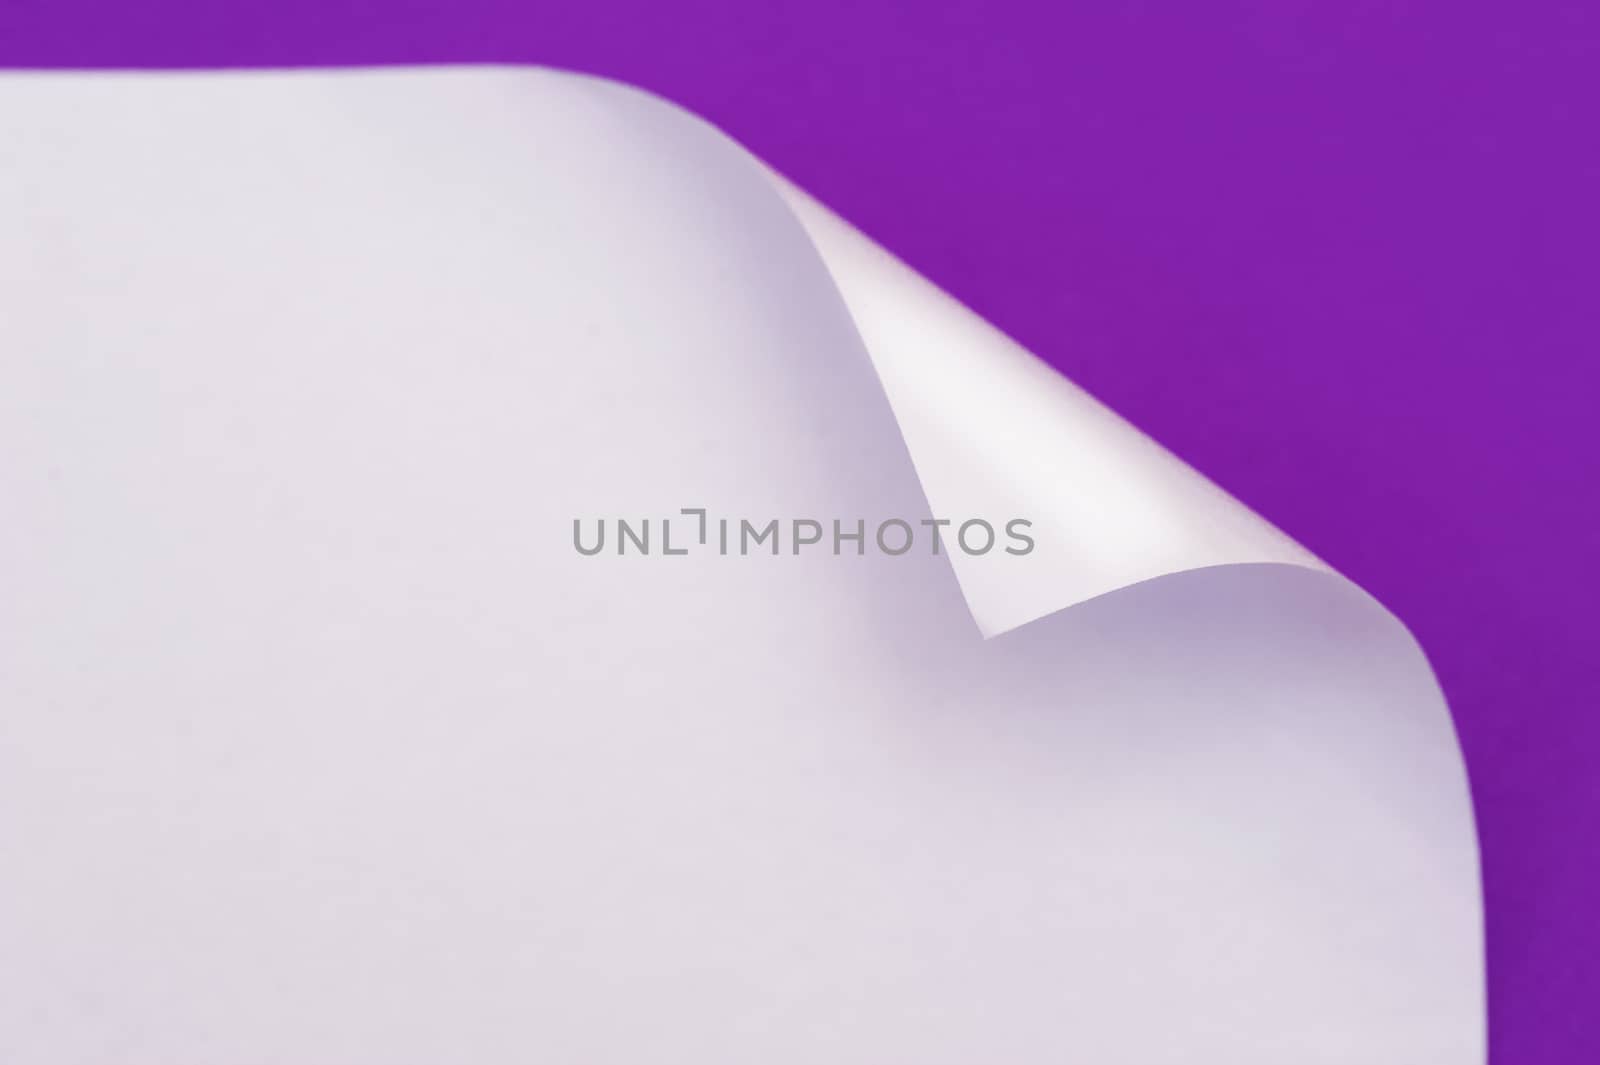 sheet of paper with the wrapped up corner on a purple background.